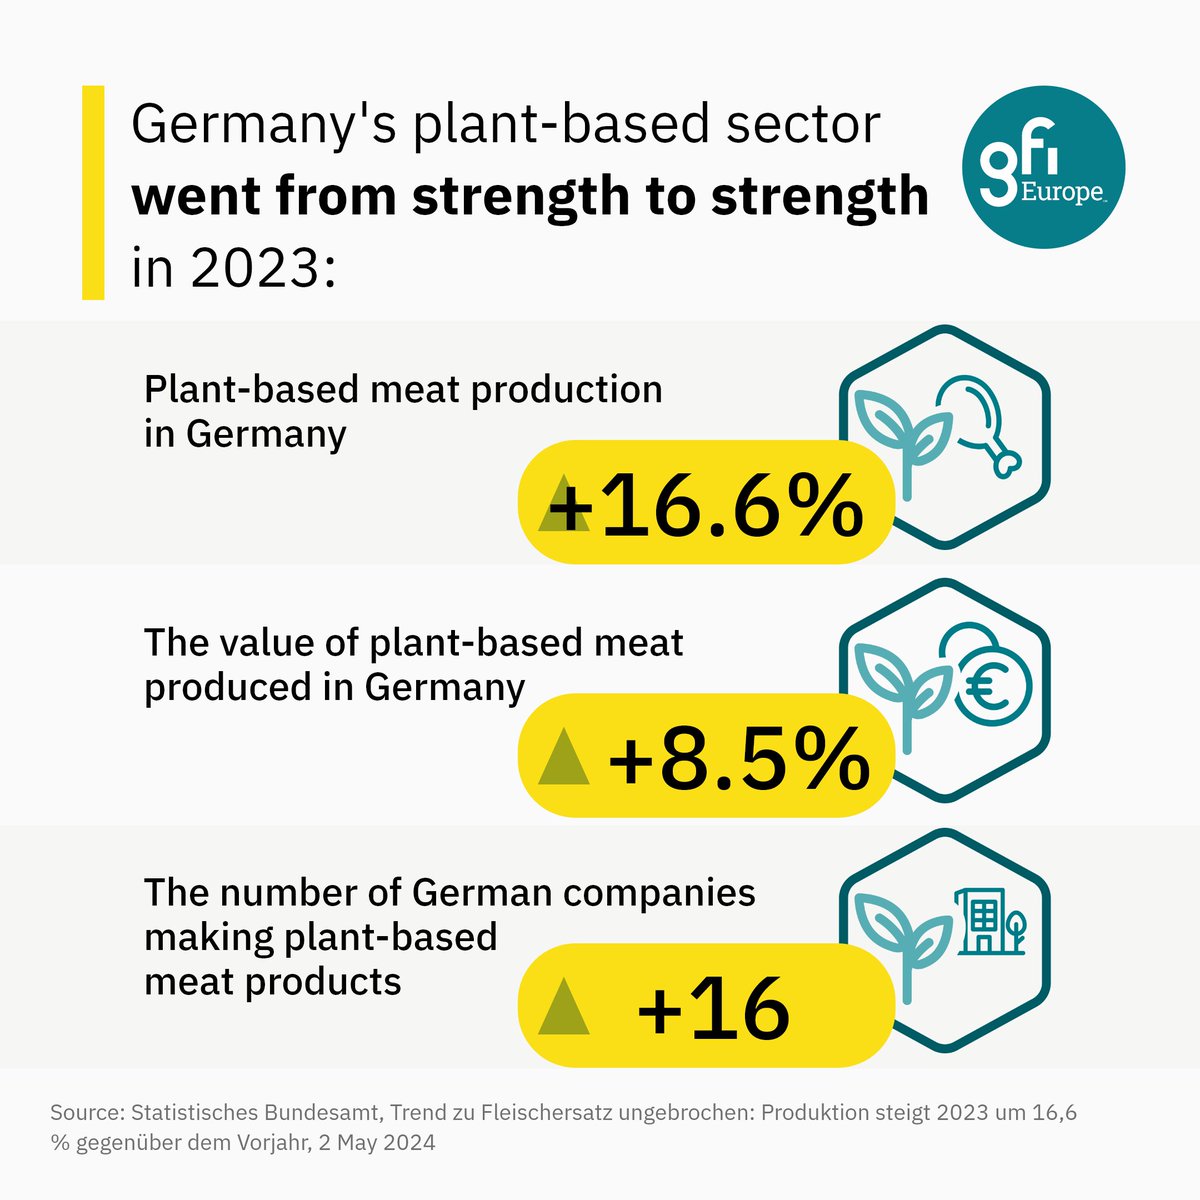 🌱Promising statistics from the Federal Statistical Office of Germany showed sustained growth for the country's plant-based sector in 2023. As protein diversification becomes a growing global imperative, successful early adopters stand to see considerable dividends.